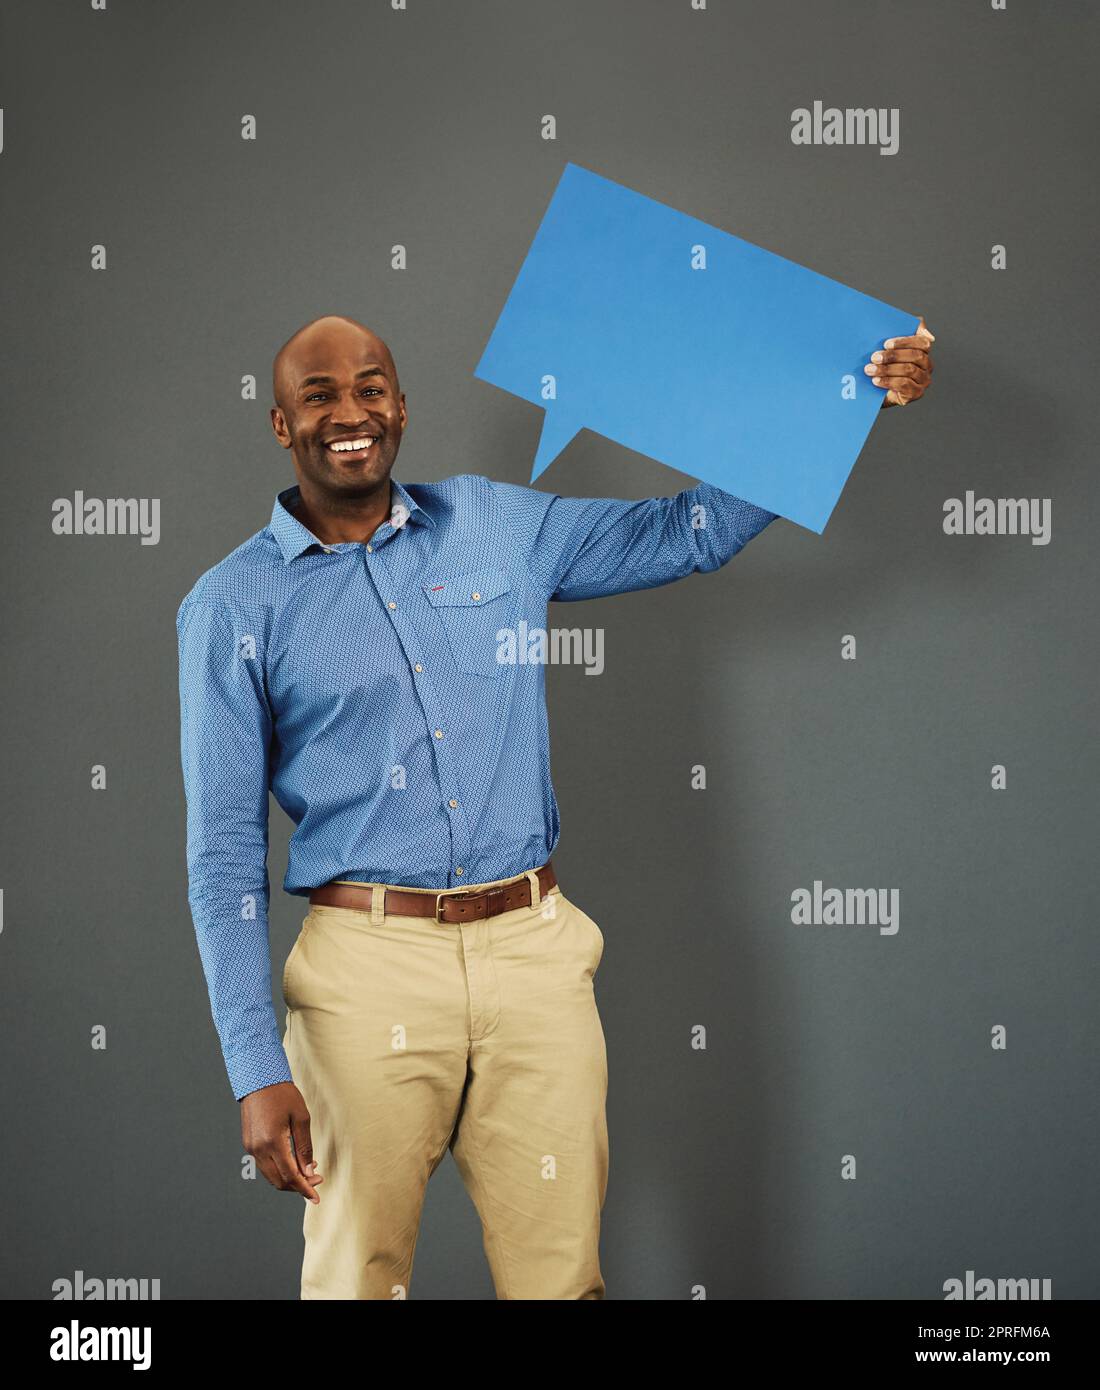 Smiling, african american male voter holding a copyspace board sign on public opinion message. Casual and positive man holding a social media speech bubble or communication icon for news poll idea Stock Photo